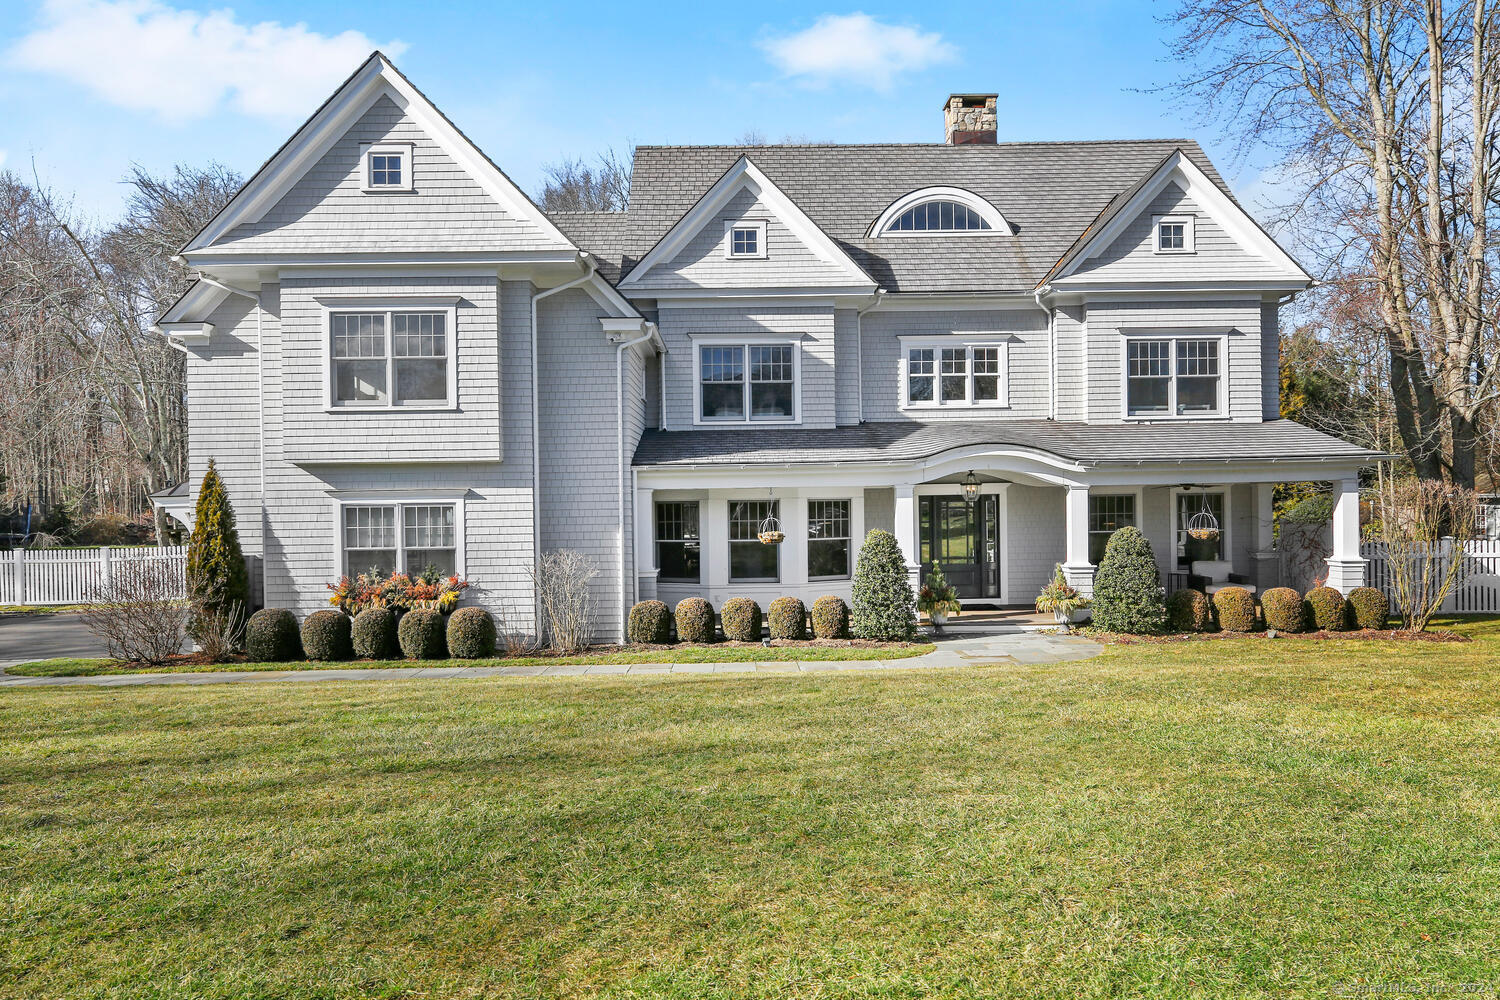 50 Thurton Drive, New Canaan, Connecticut - 6 Bedrooms  
7 Bathrooms  
12 Rooms - 